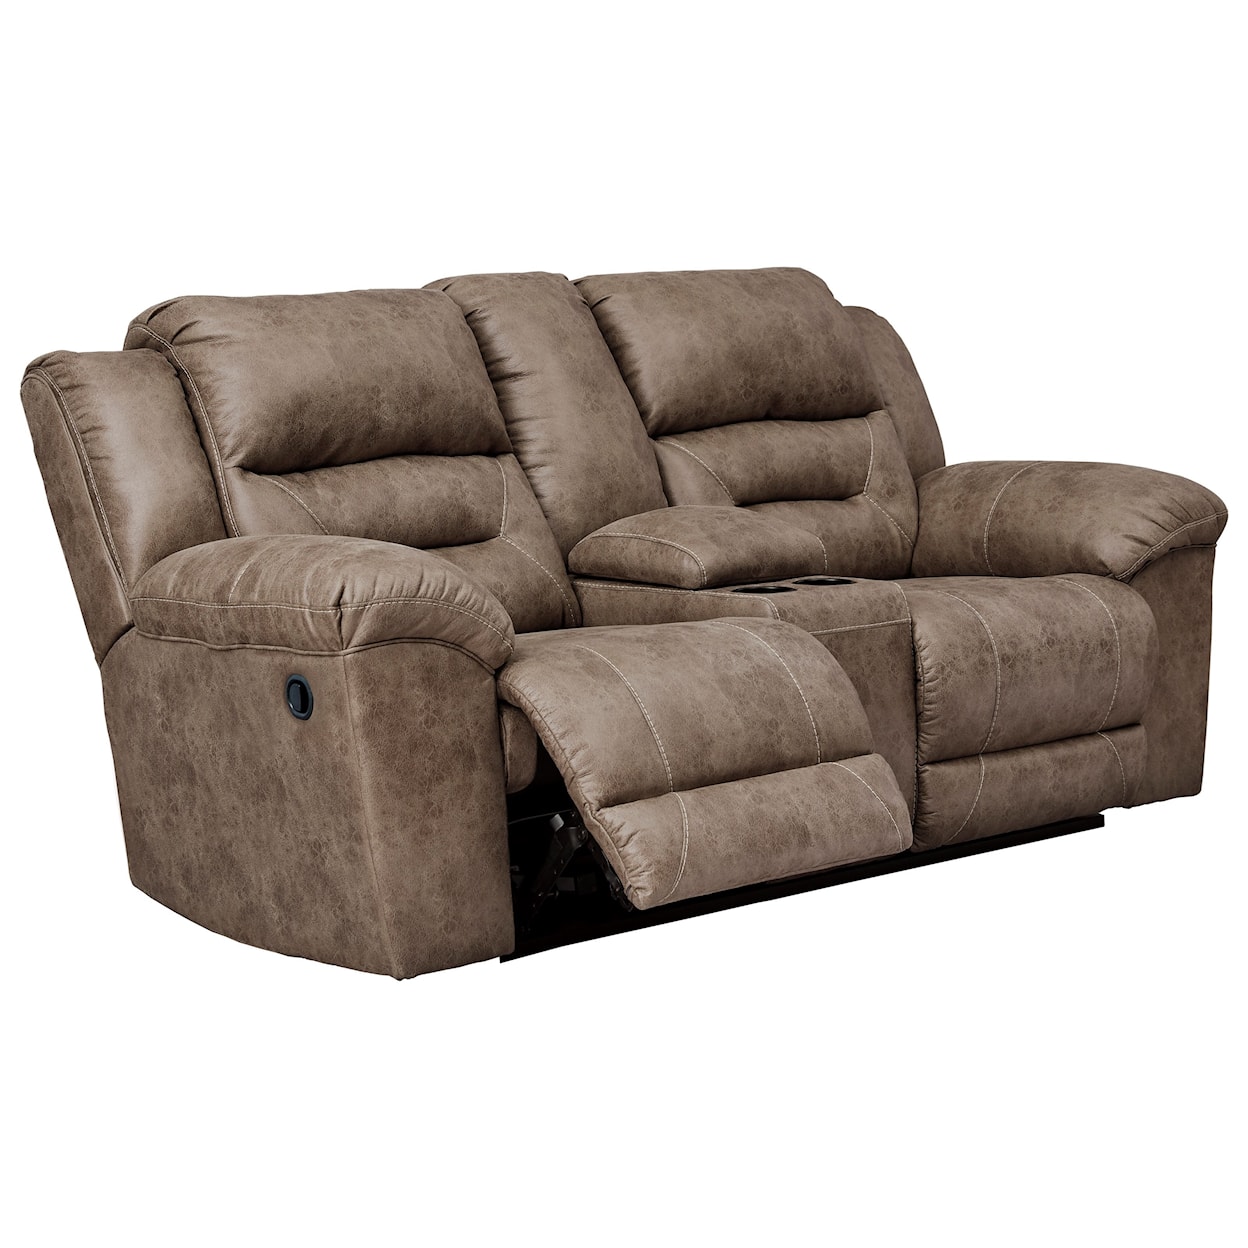 Michael Alan Select Stoneland Double Reclining Loveseat w/ Console